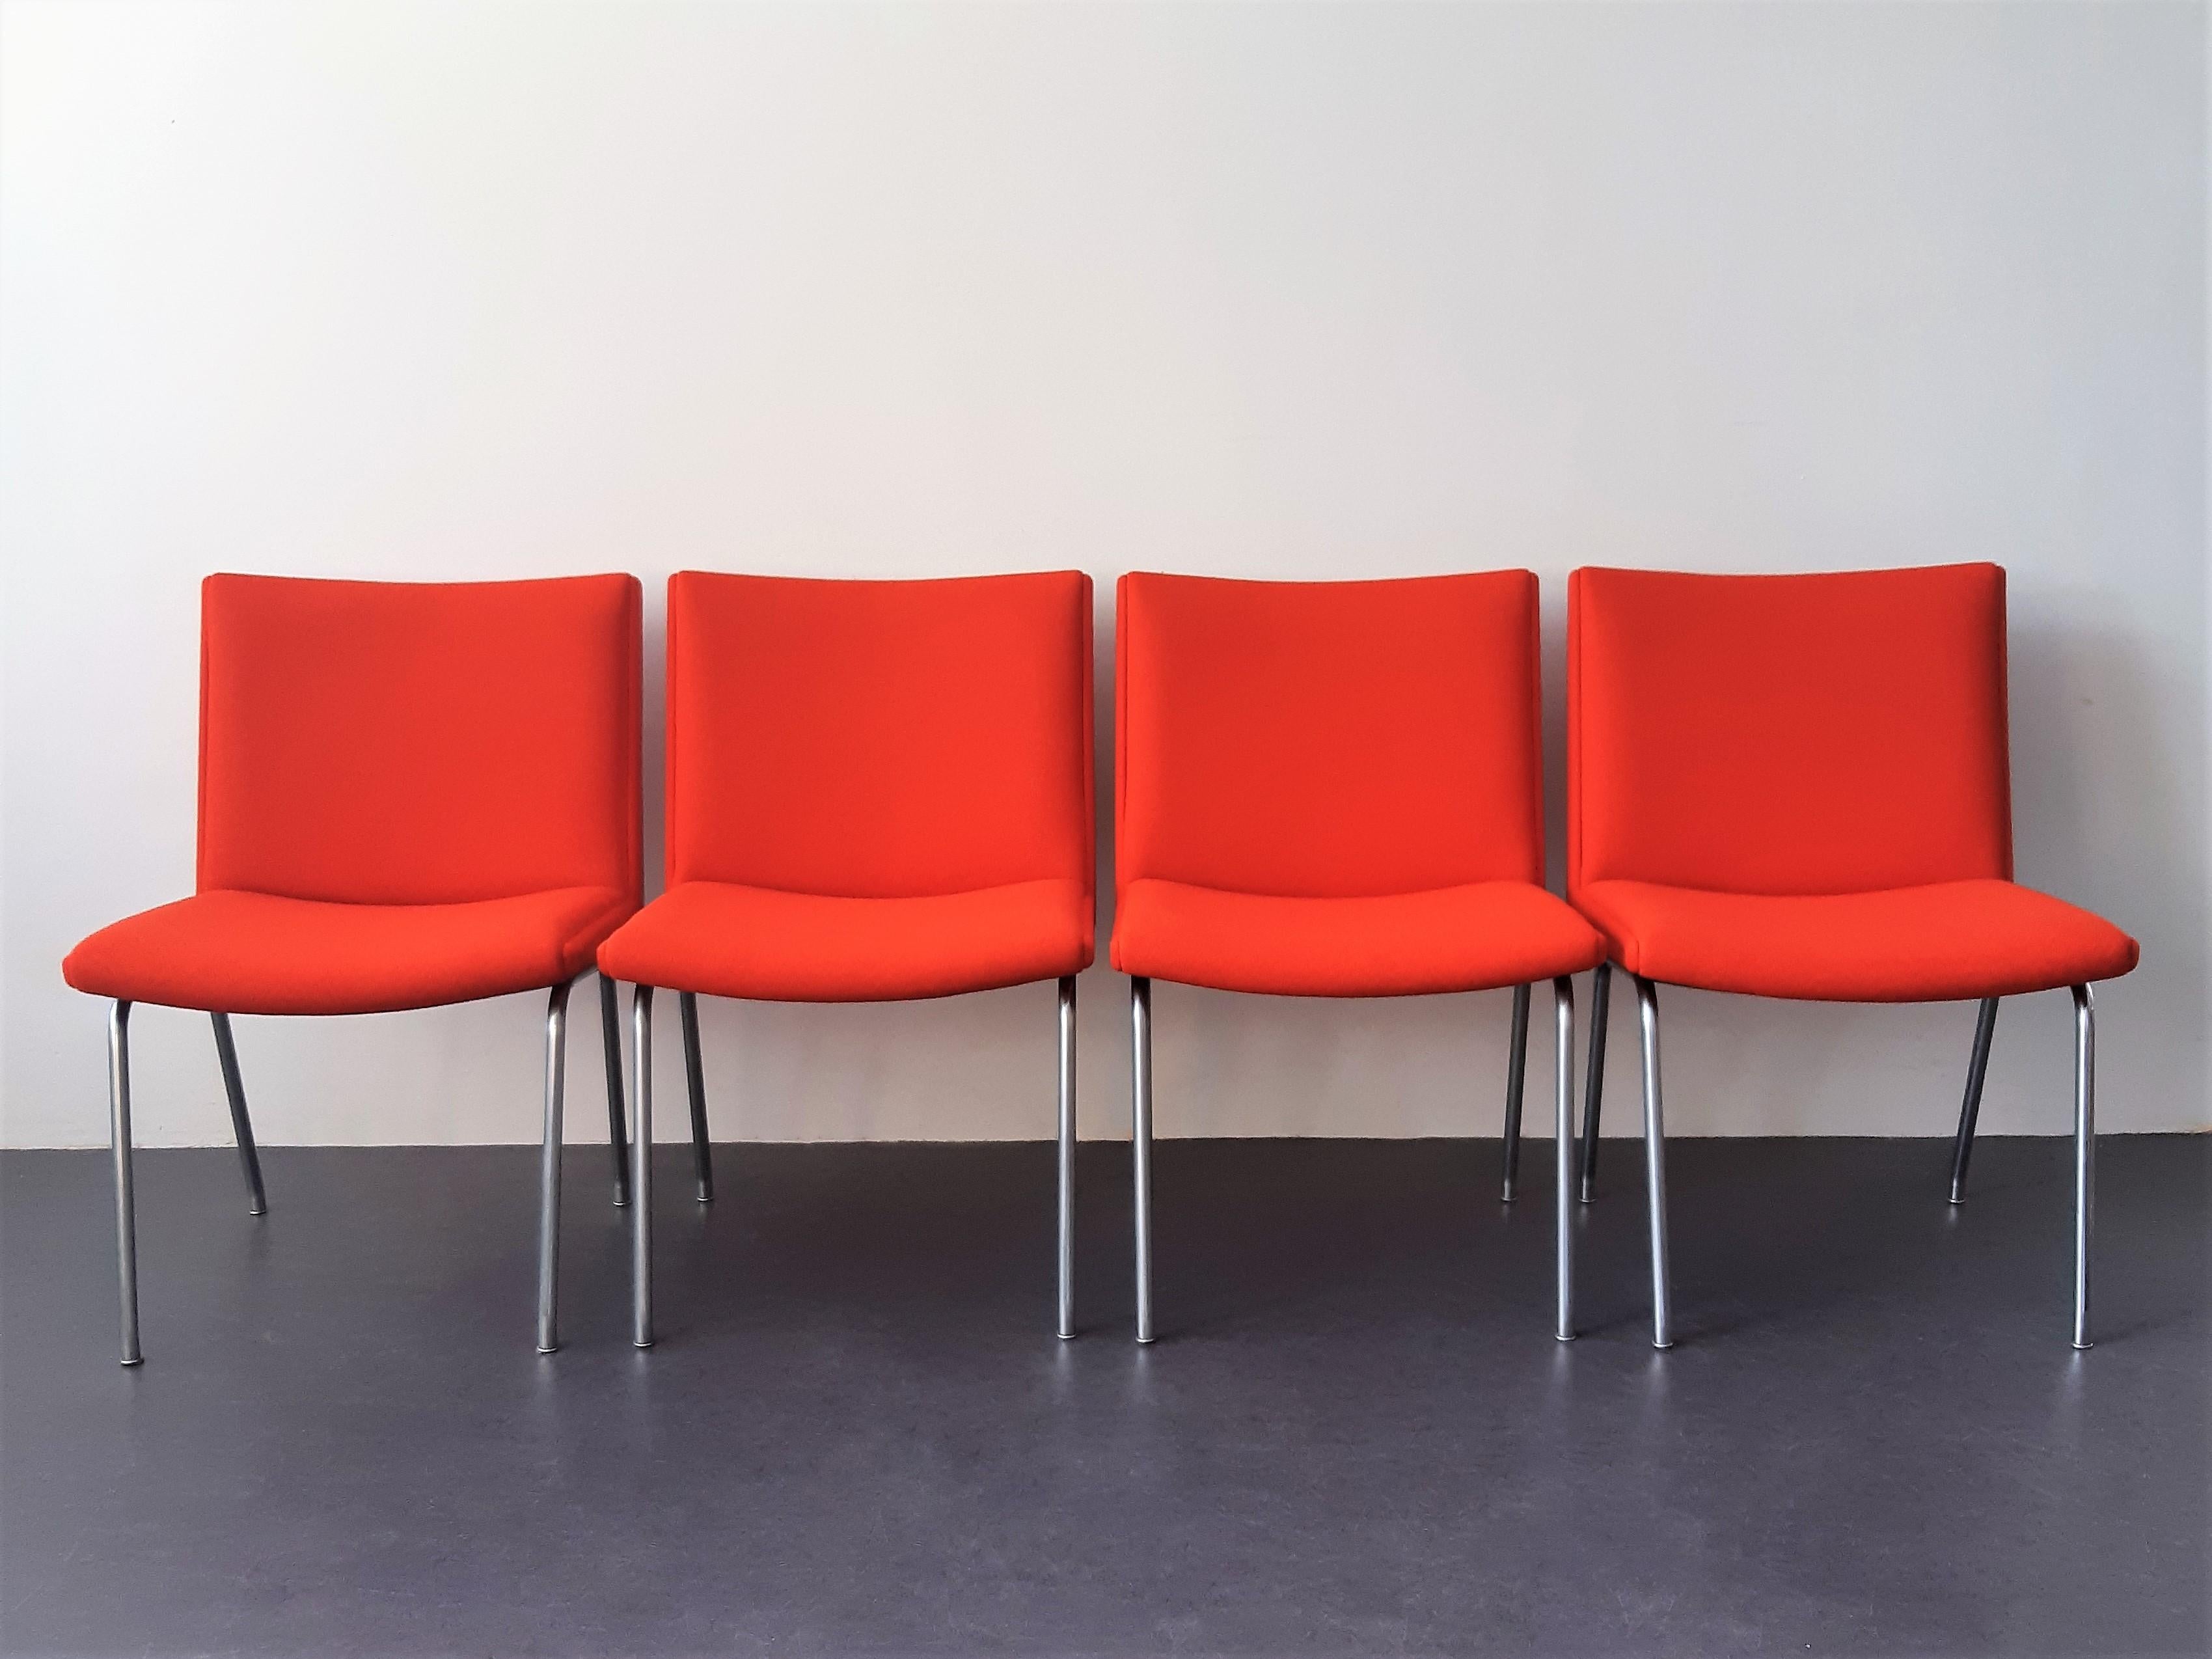 The Airport chair, model AP40, is a design from 1959 by Hans J. Wegner for the Kastrup Airport in Copenhagen. It was produced by the company AP Stolen. These 4 chairs are completely re-upholstered in a beautiful and high quality red Kvadrat felt